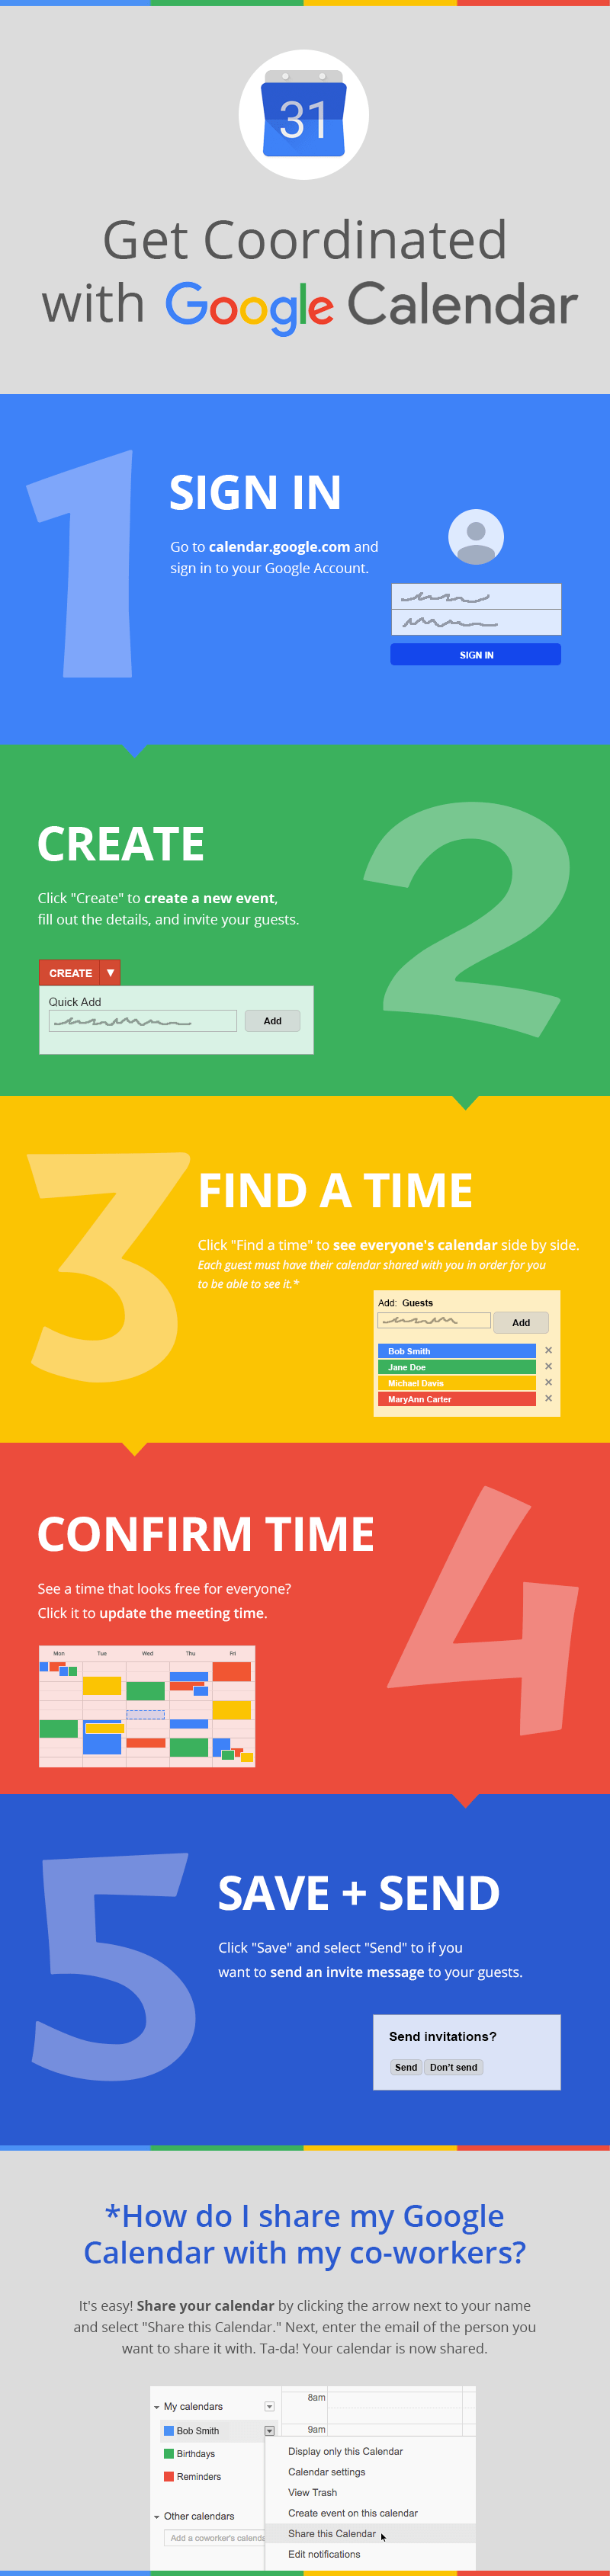 How to Find a Meeting Time that Works for Everyone Infographic